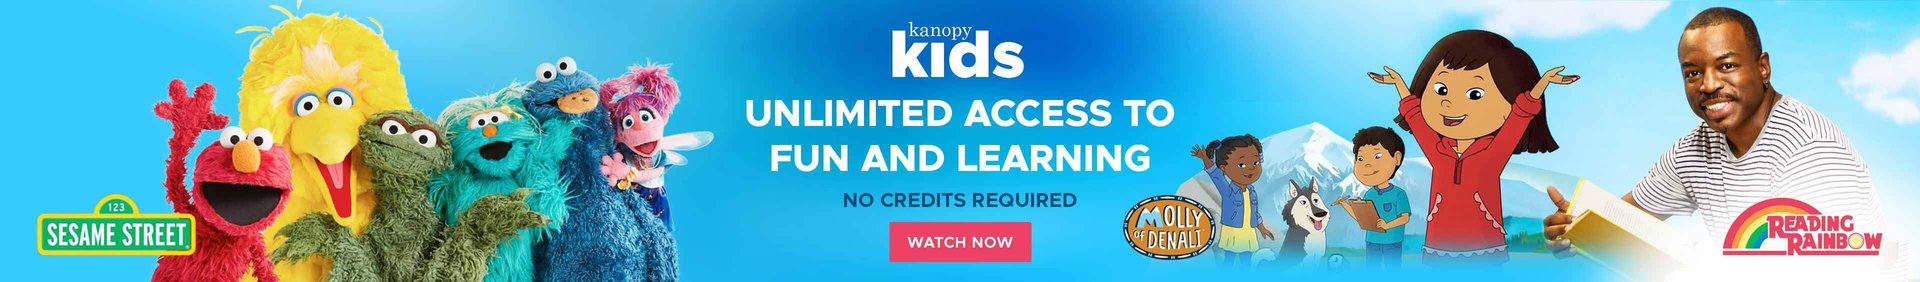 Kids Kanopy Unlimited access to fun and learning text with video stills